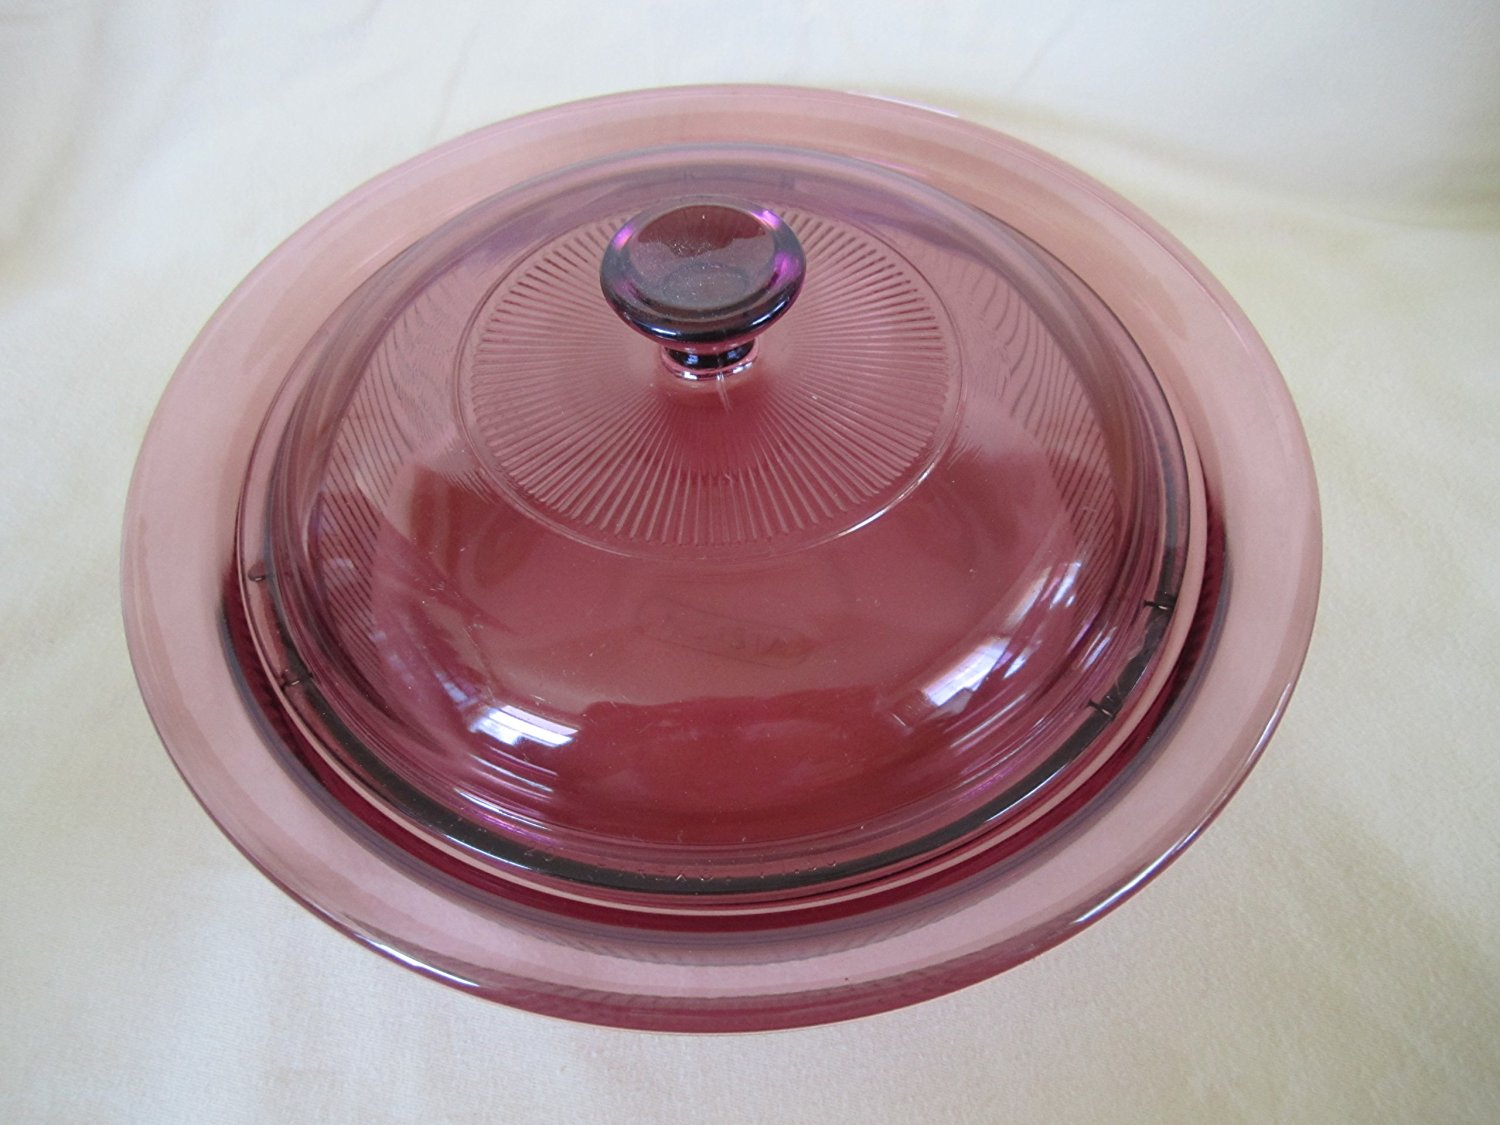 Corning Ware Visions Visionware Glass Cranberry Covered Casserole